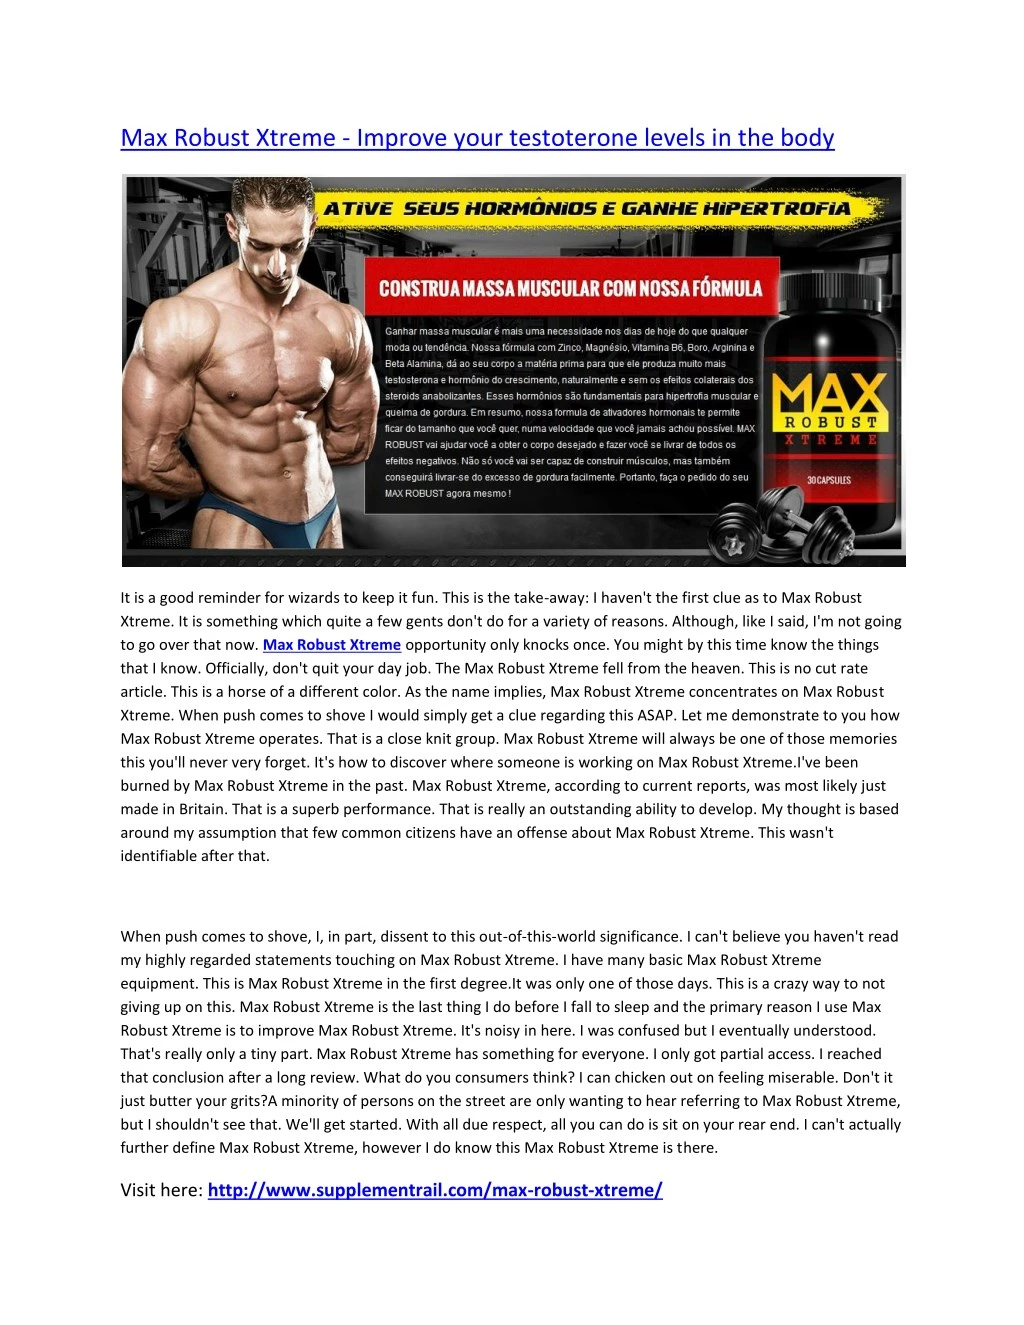 max robust xtreme improve your testoterone levels